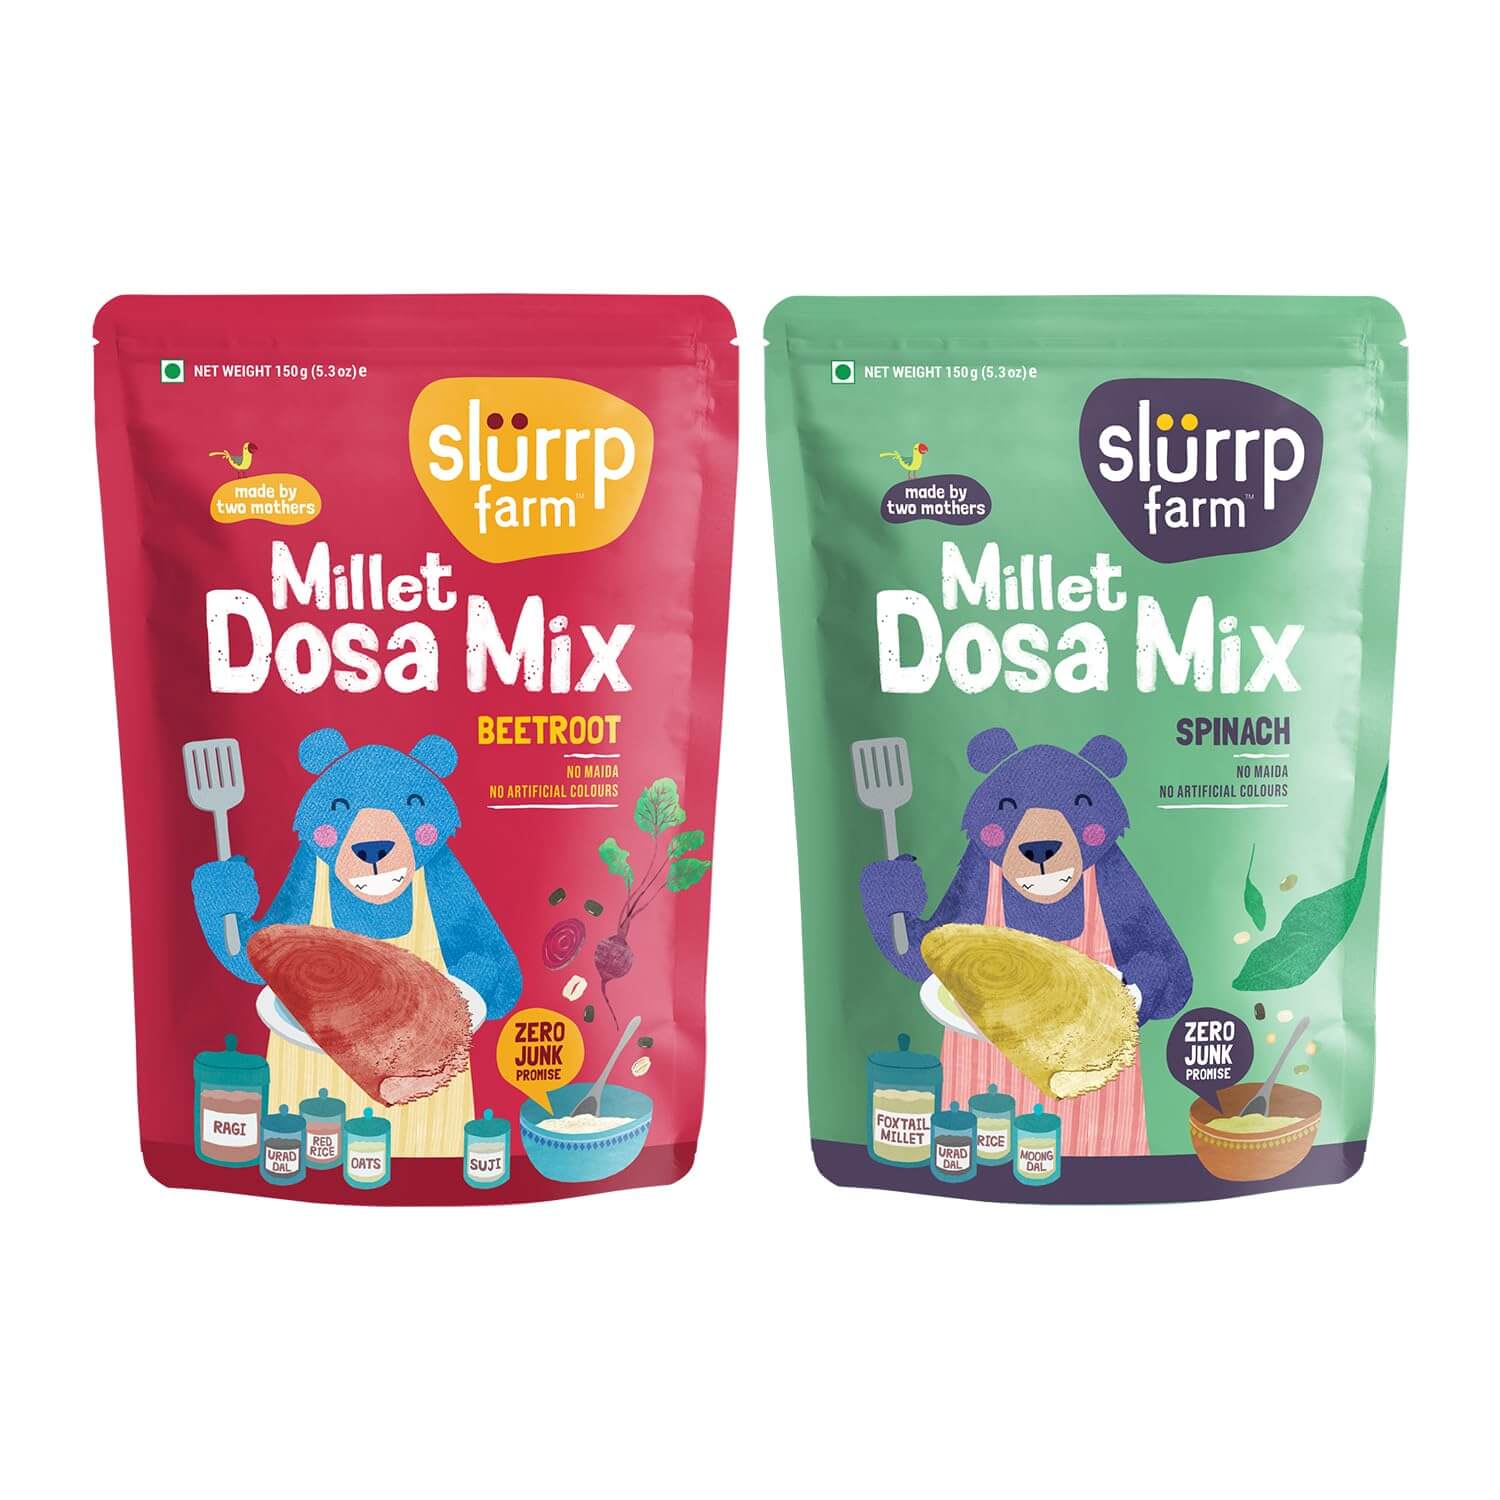 Buy Slurrp Farm Millet Dosa Mix with Beetroot & Spinach for Small Children - (Pack of 2) online in India at uyyaala.com